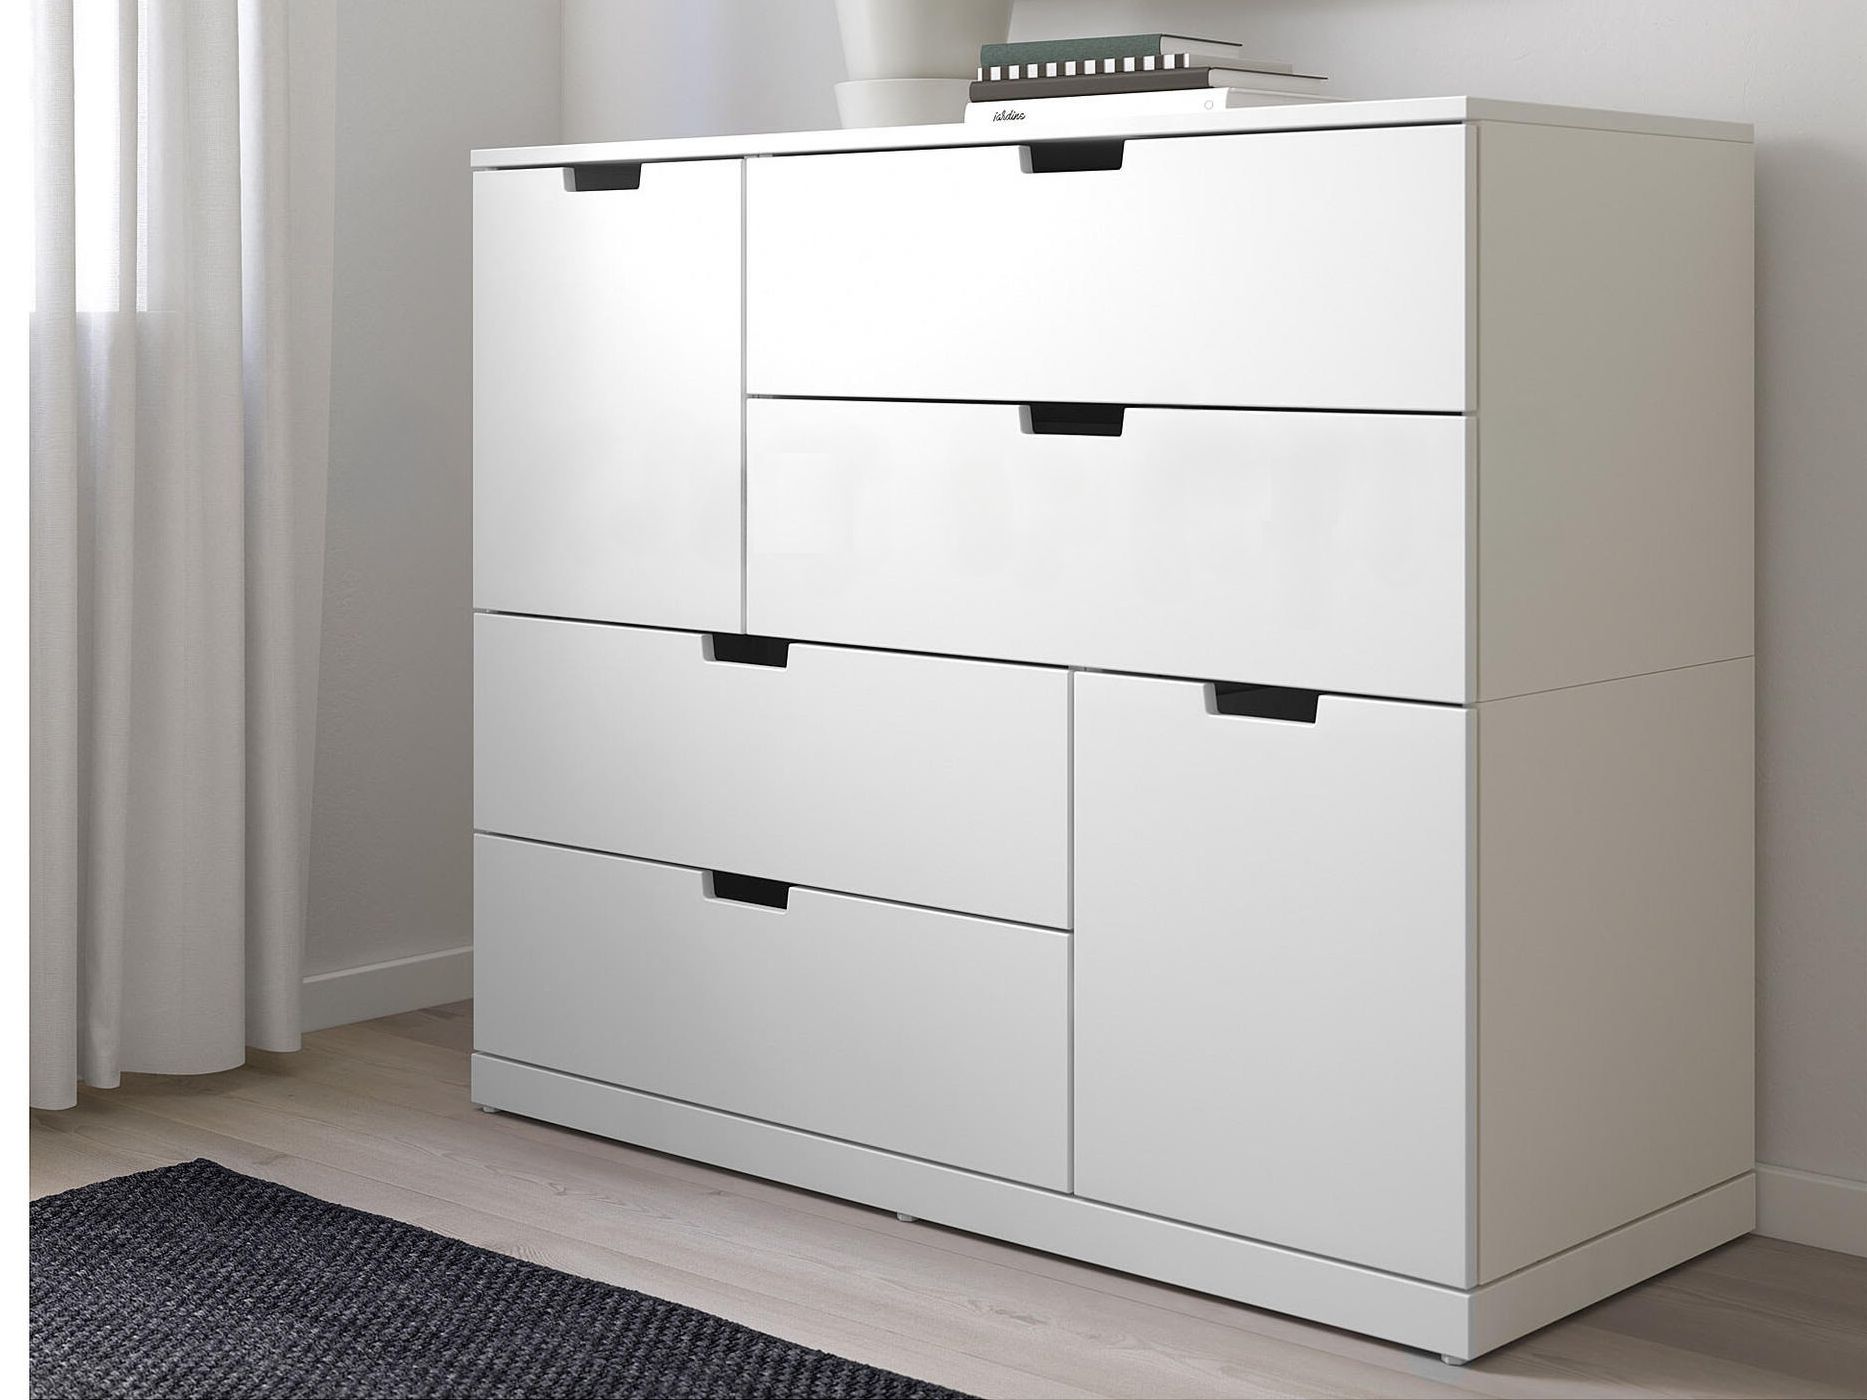 How to choose and buy on a bulletin board in Israel: Dressers with roomy storage drawers.